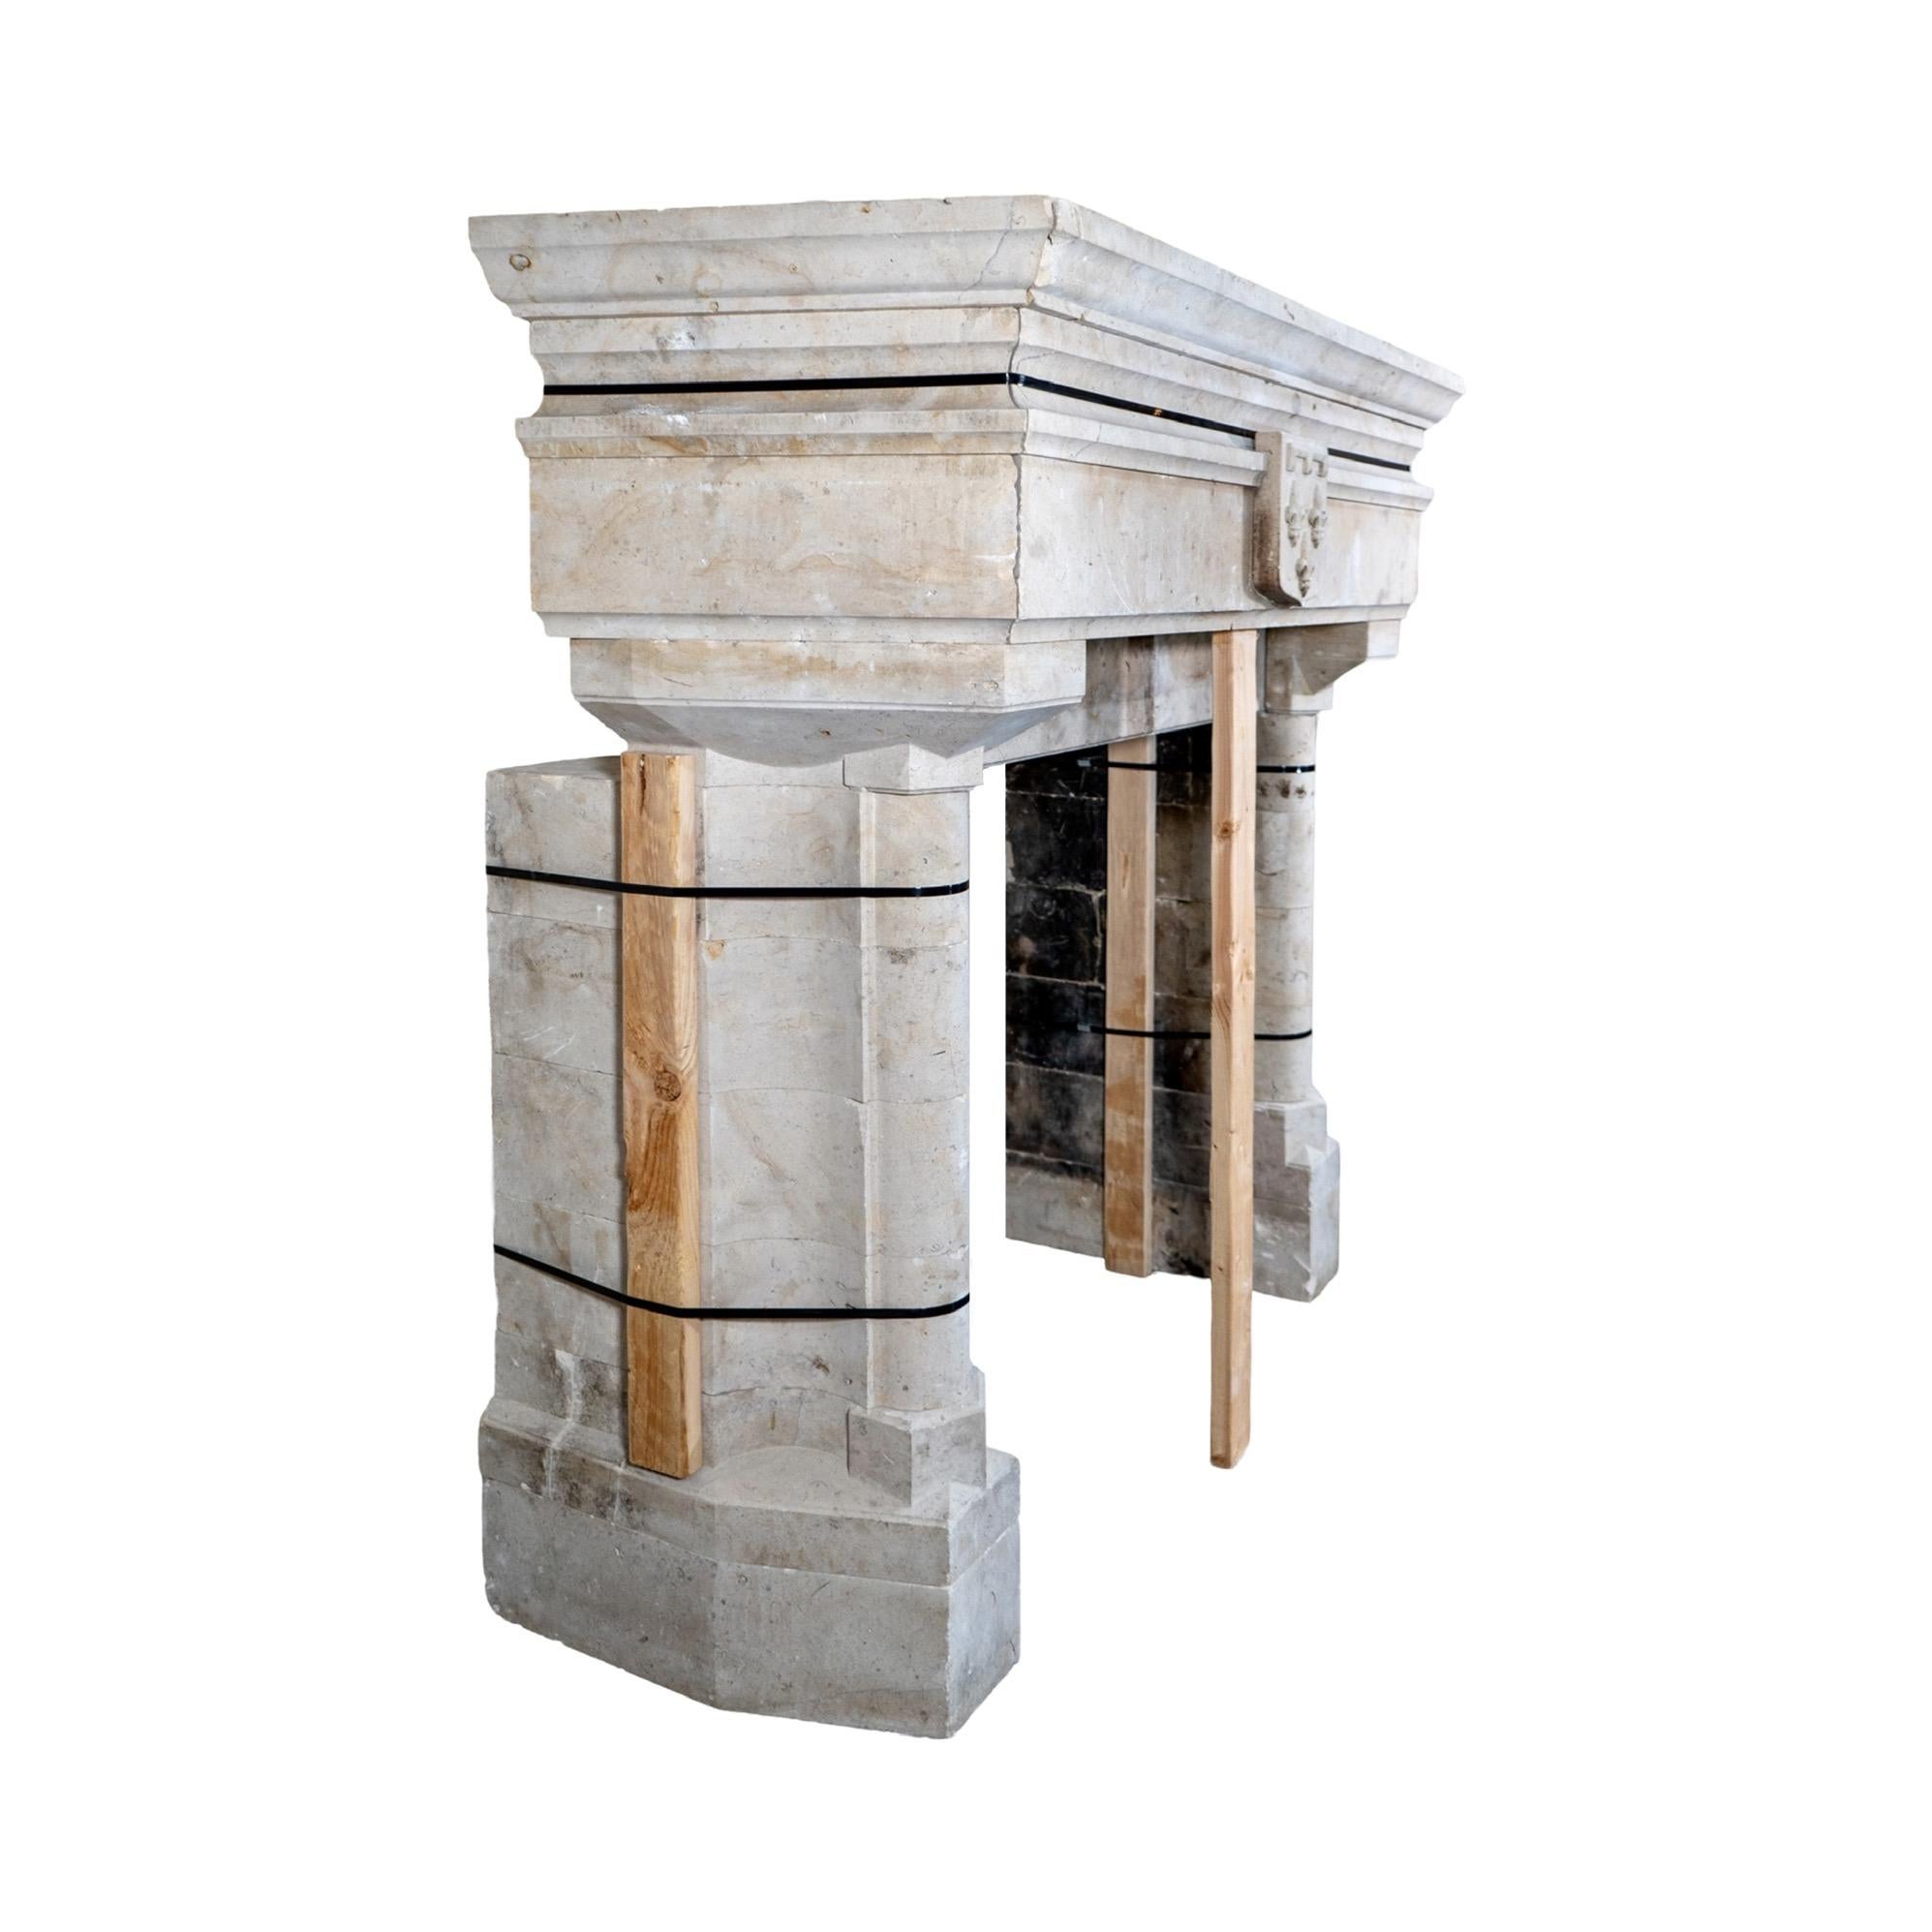 The French Limestone Mantel features a beautifully carved fleur de lis emblem and dates back to the 19th century. Expertly crafted from authentic limestone imported from France, this mantel adds elegance and sophistication to any room while also